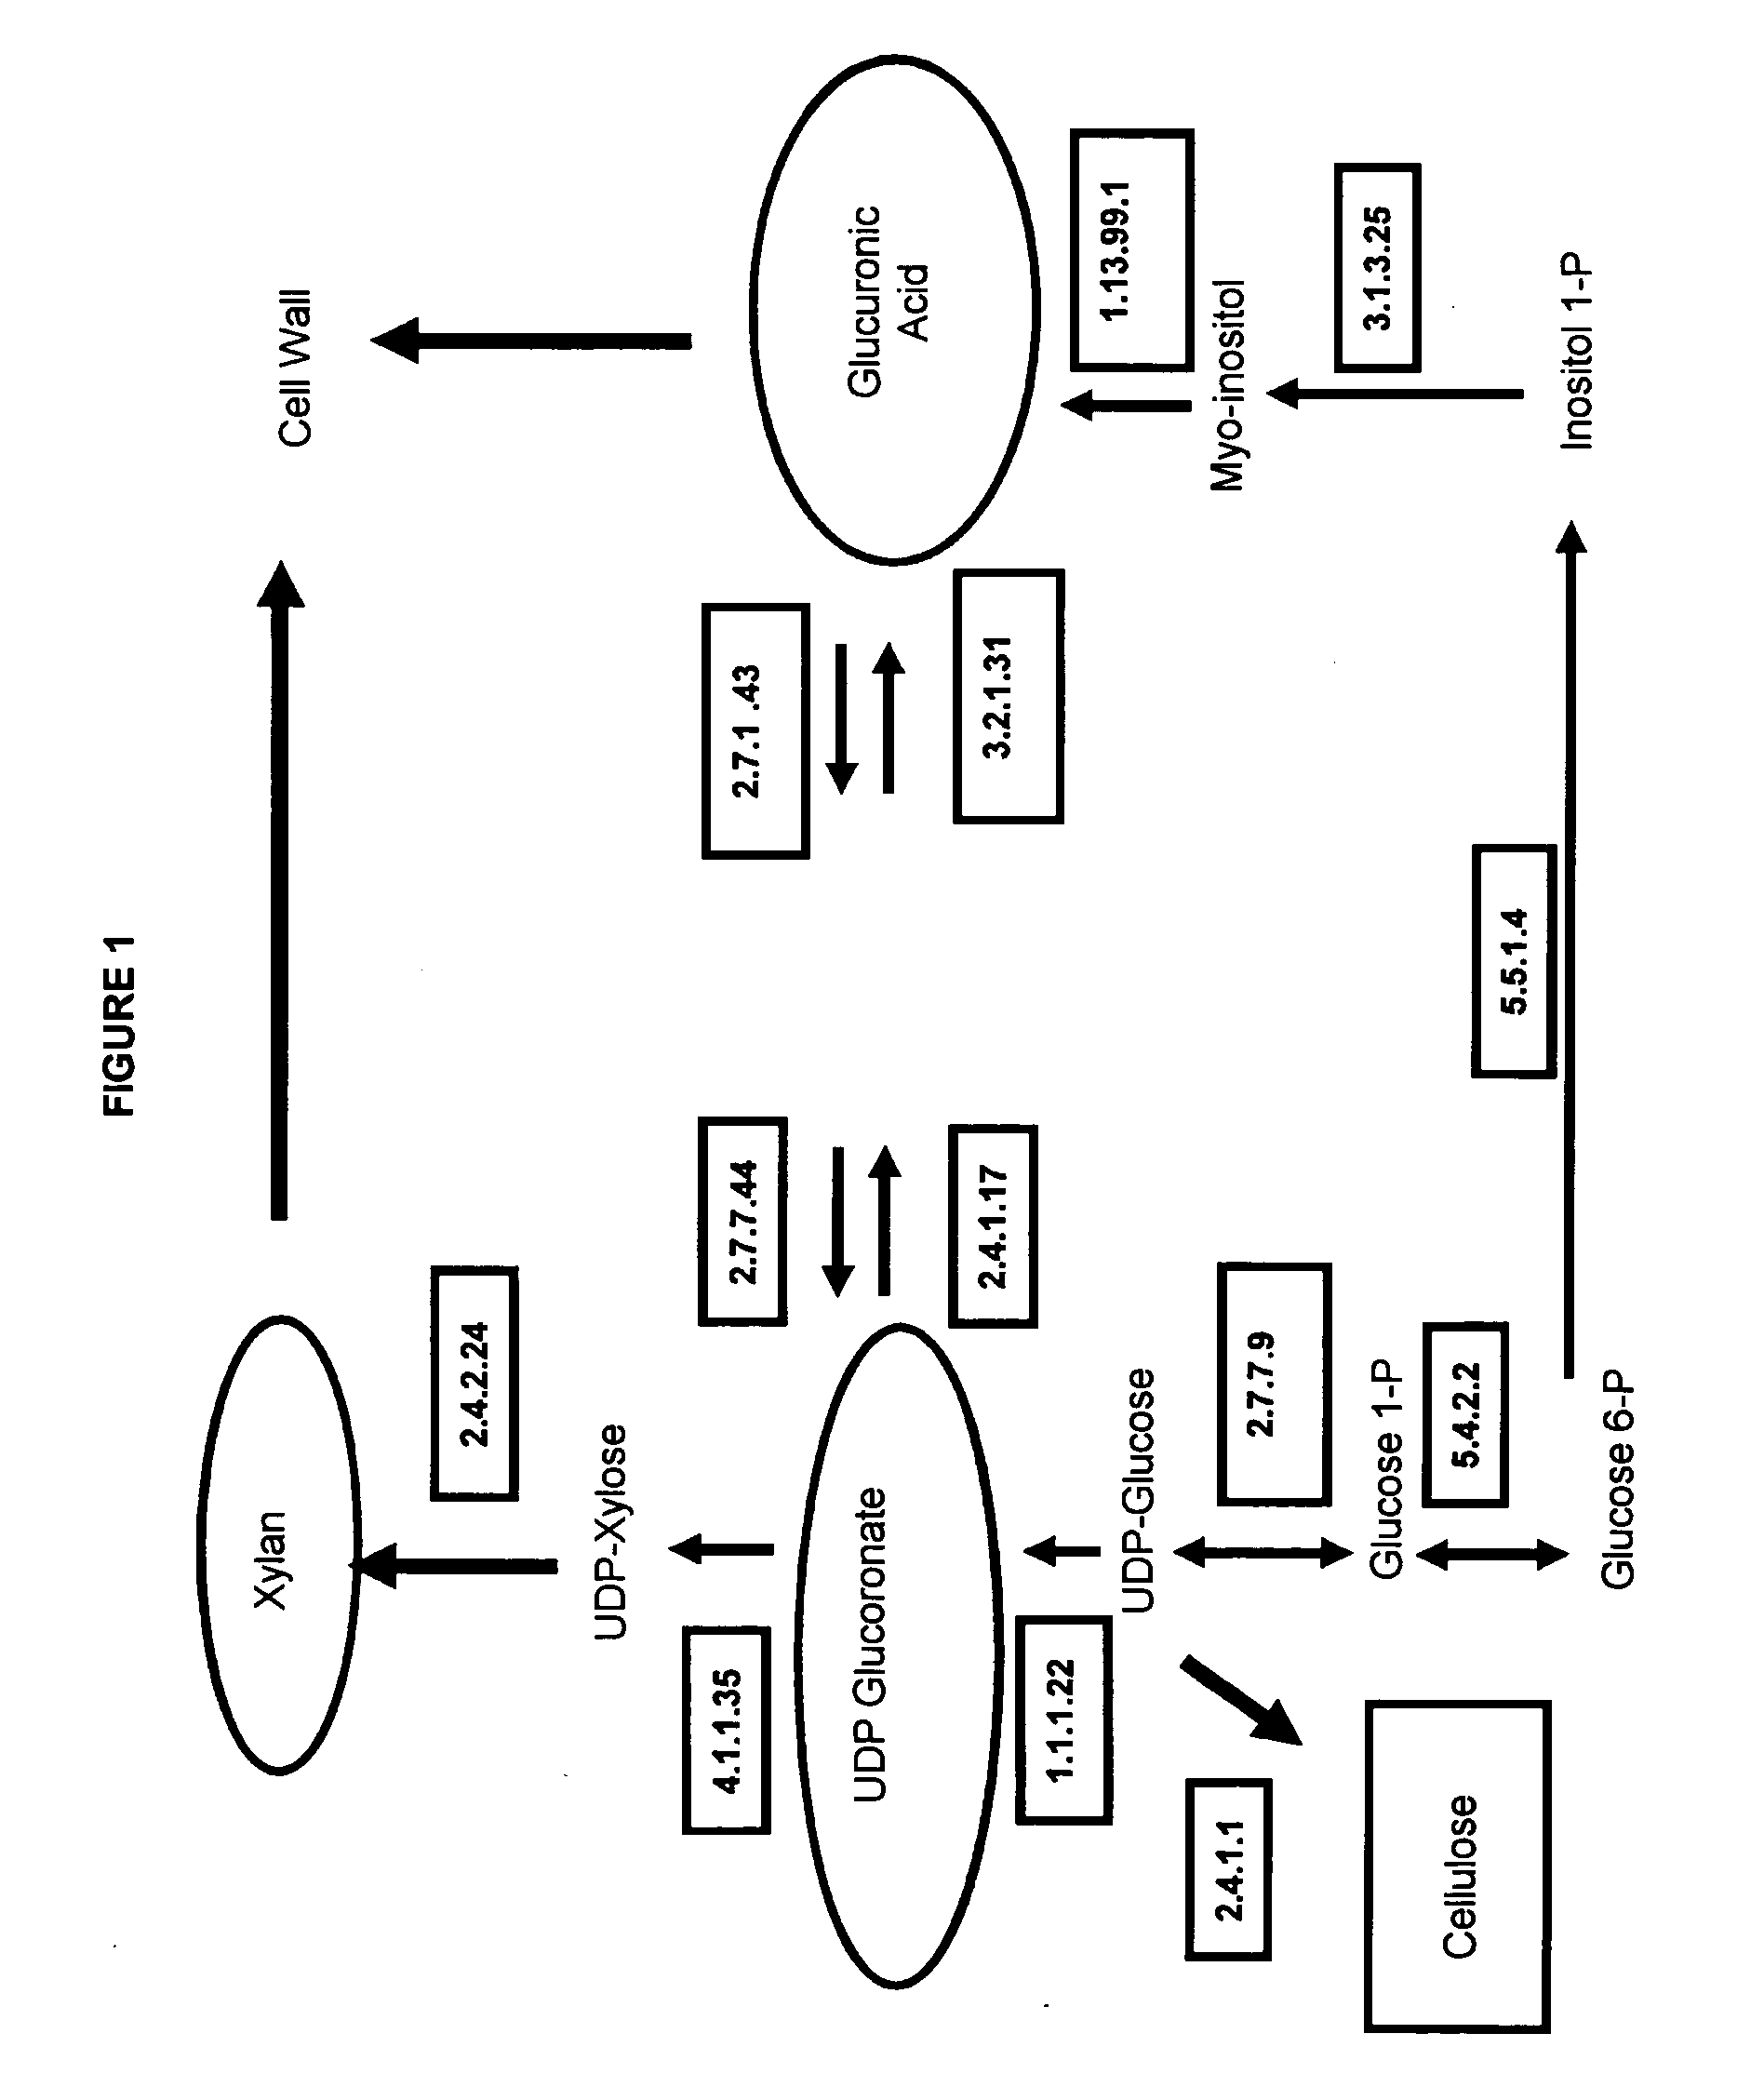 Method for the Genetic Modulation of the Biosynthesis of Hemicelluloses, Cellulose and Uronic Acids in Plant Cells Using Gene Expression Cassettes